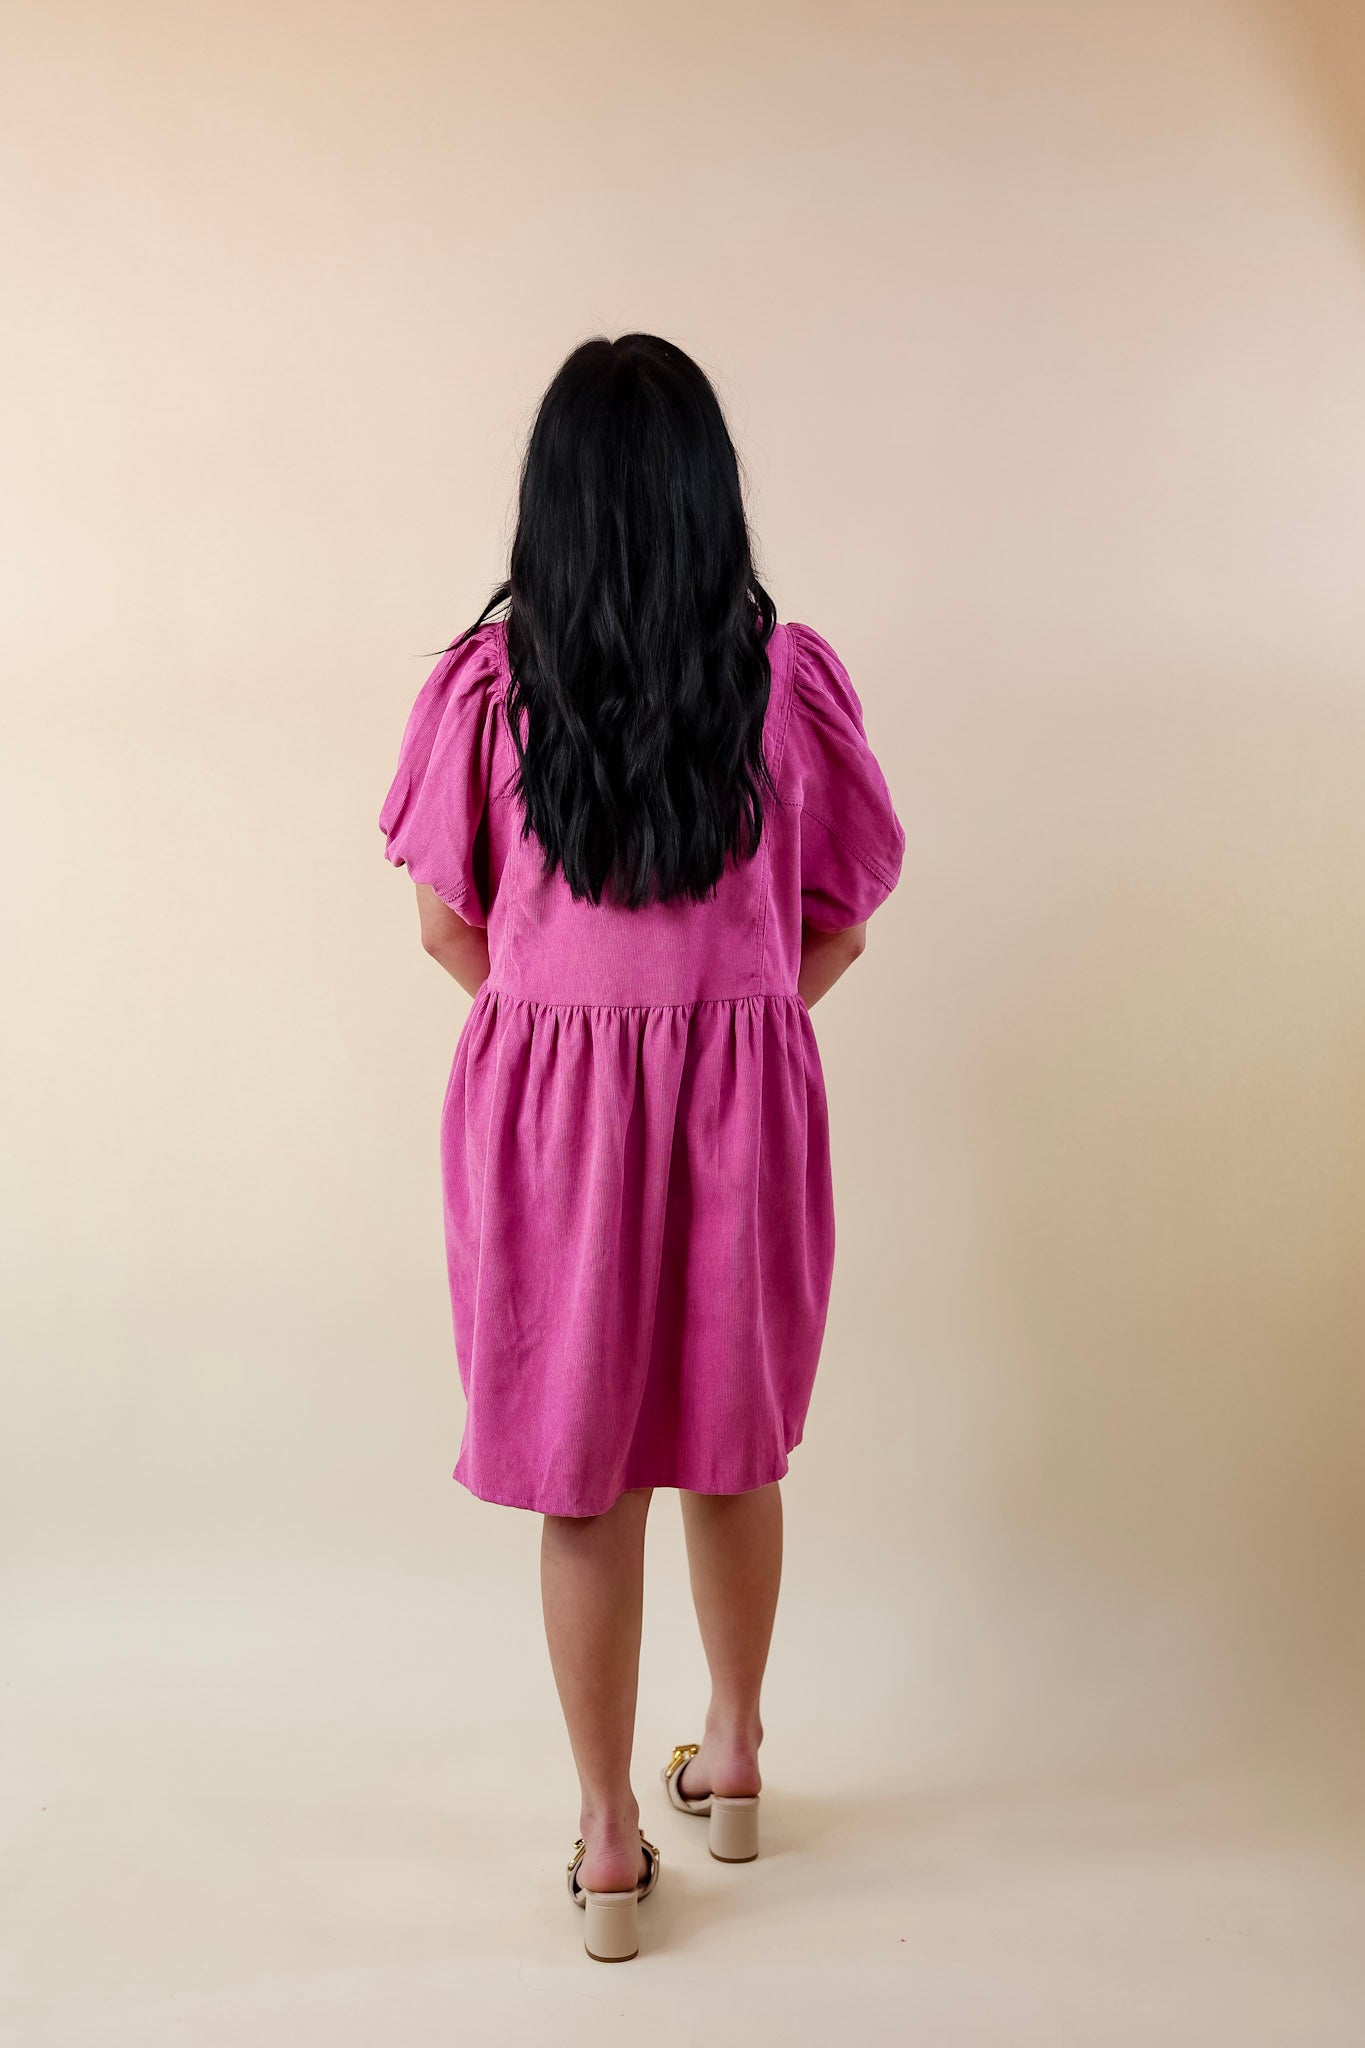 Adventures Ahead Button Up Corduroy Babydoll Dress in Magenta Purple - Giddy Up Glamour Boutique